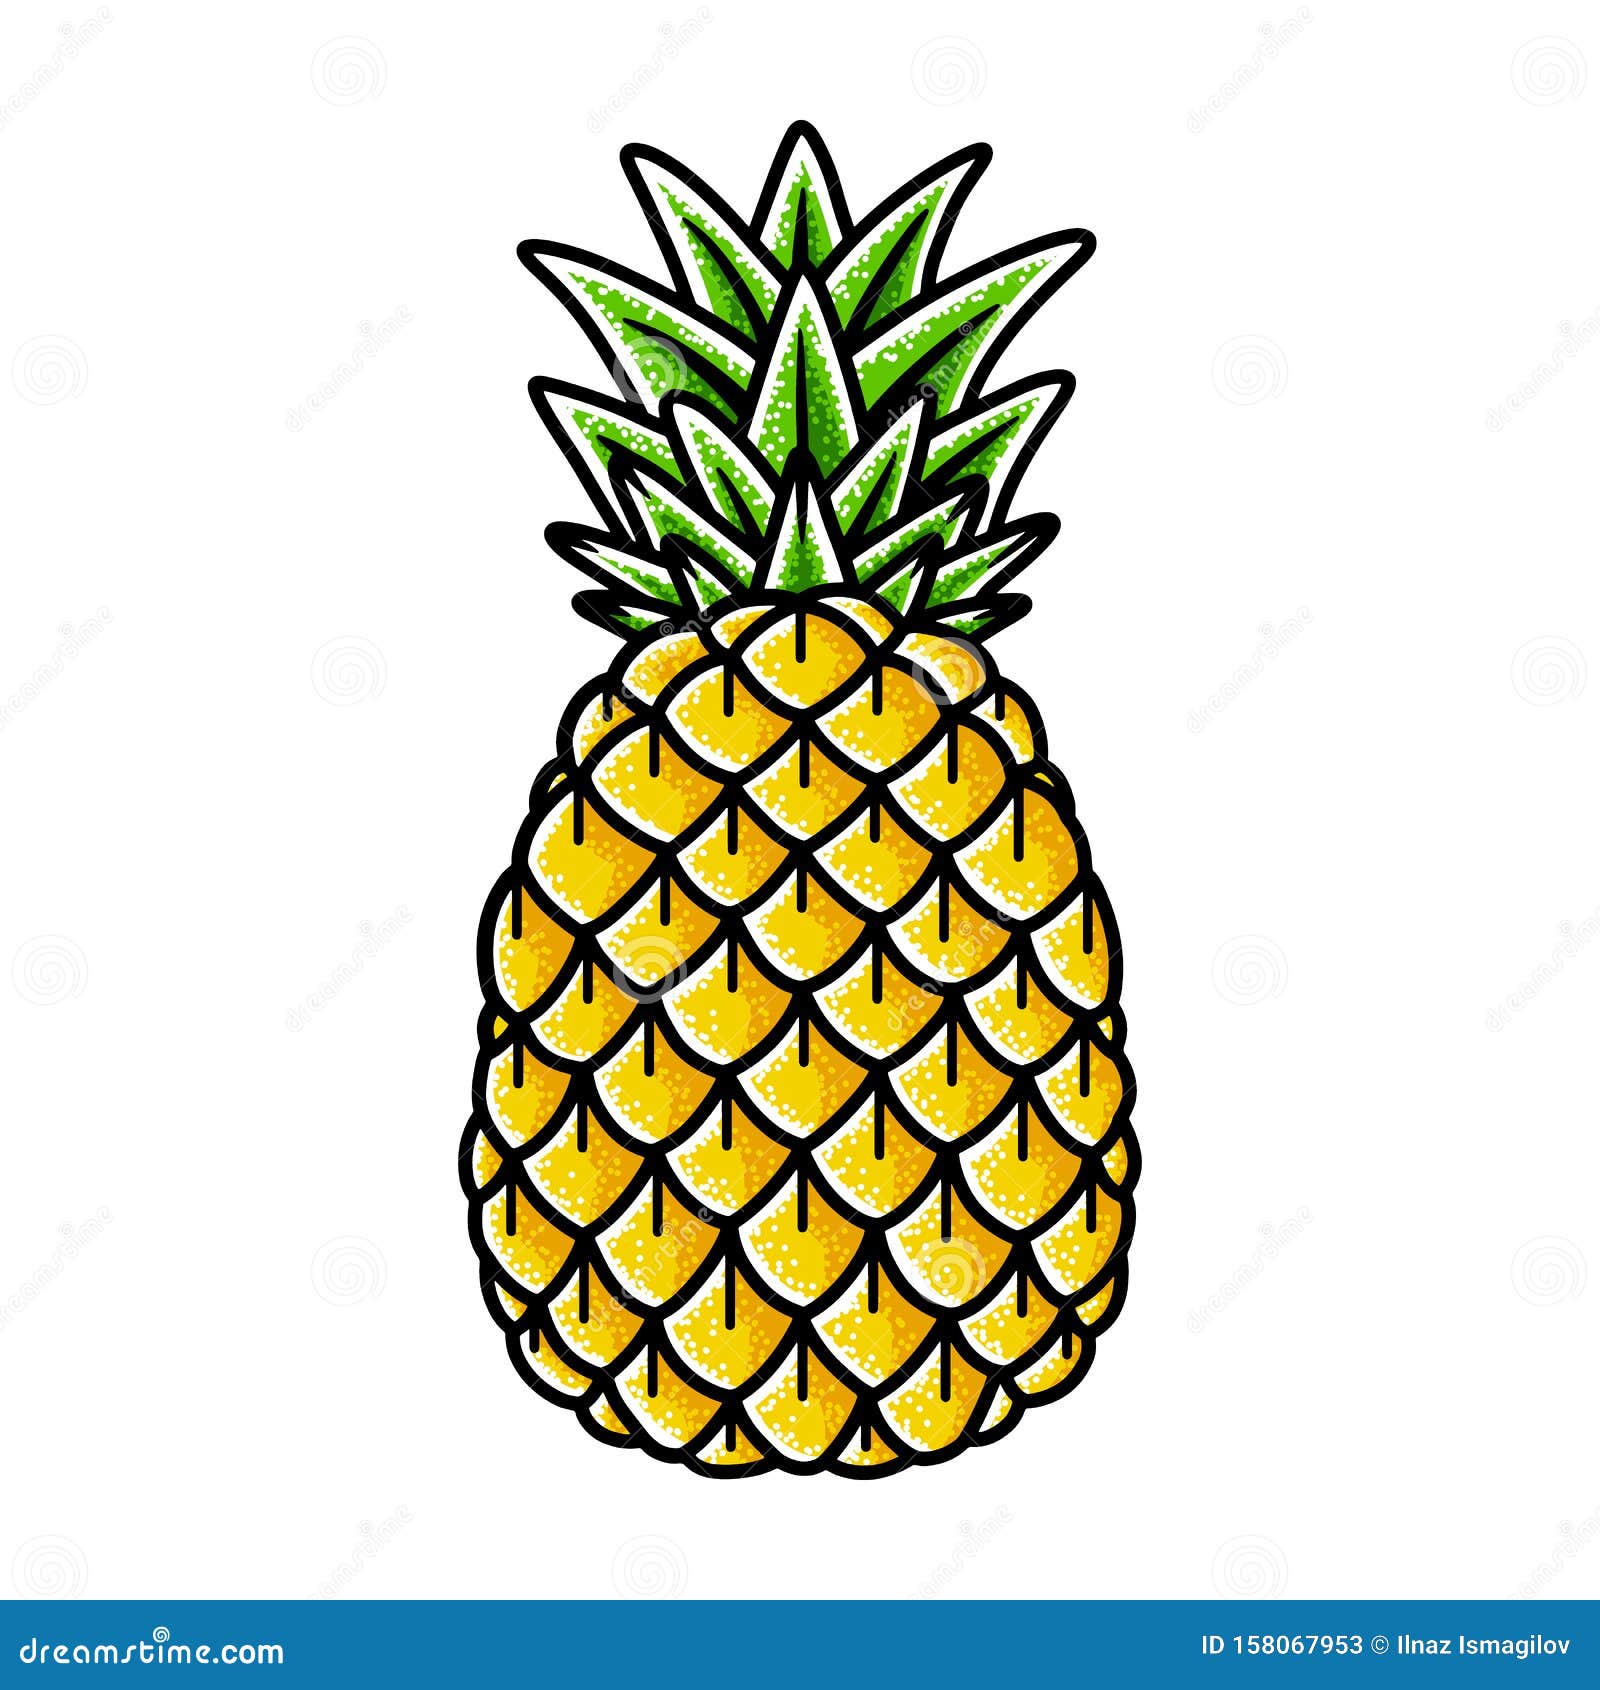 Pineapple Hand Drawing Old School Tattoo. Stock Vector - Illustration of  american, natural: 158067953